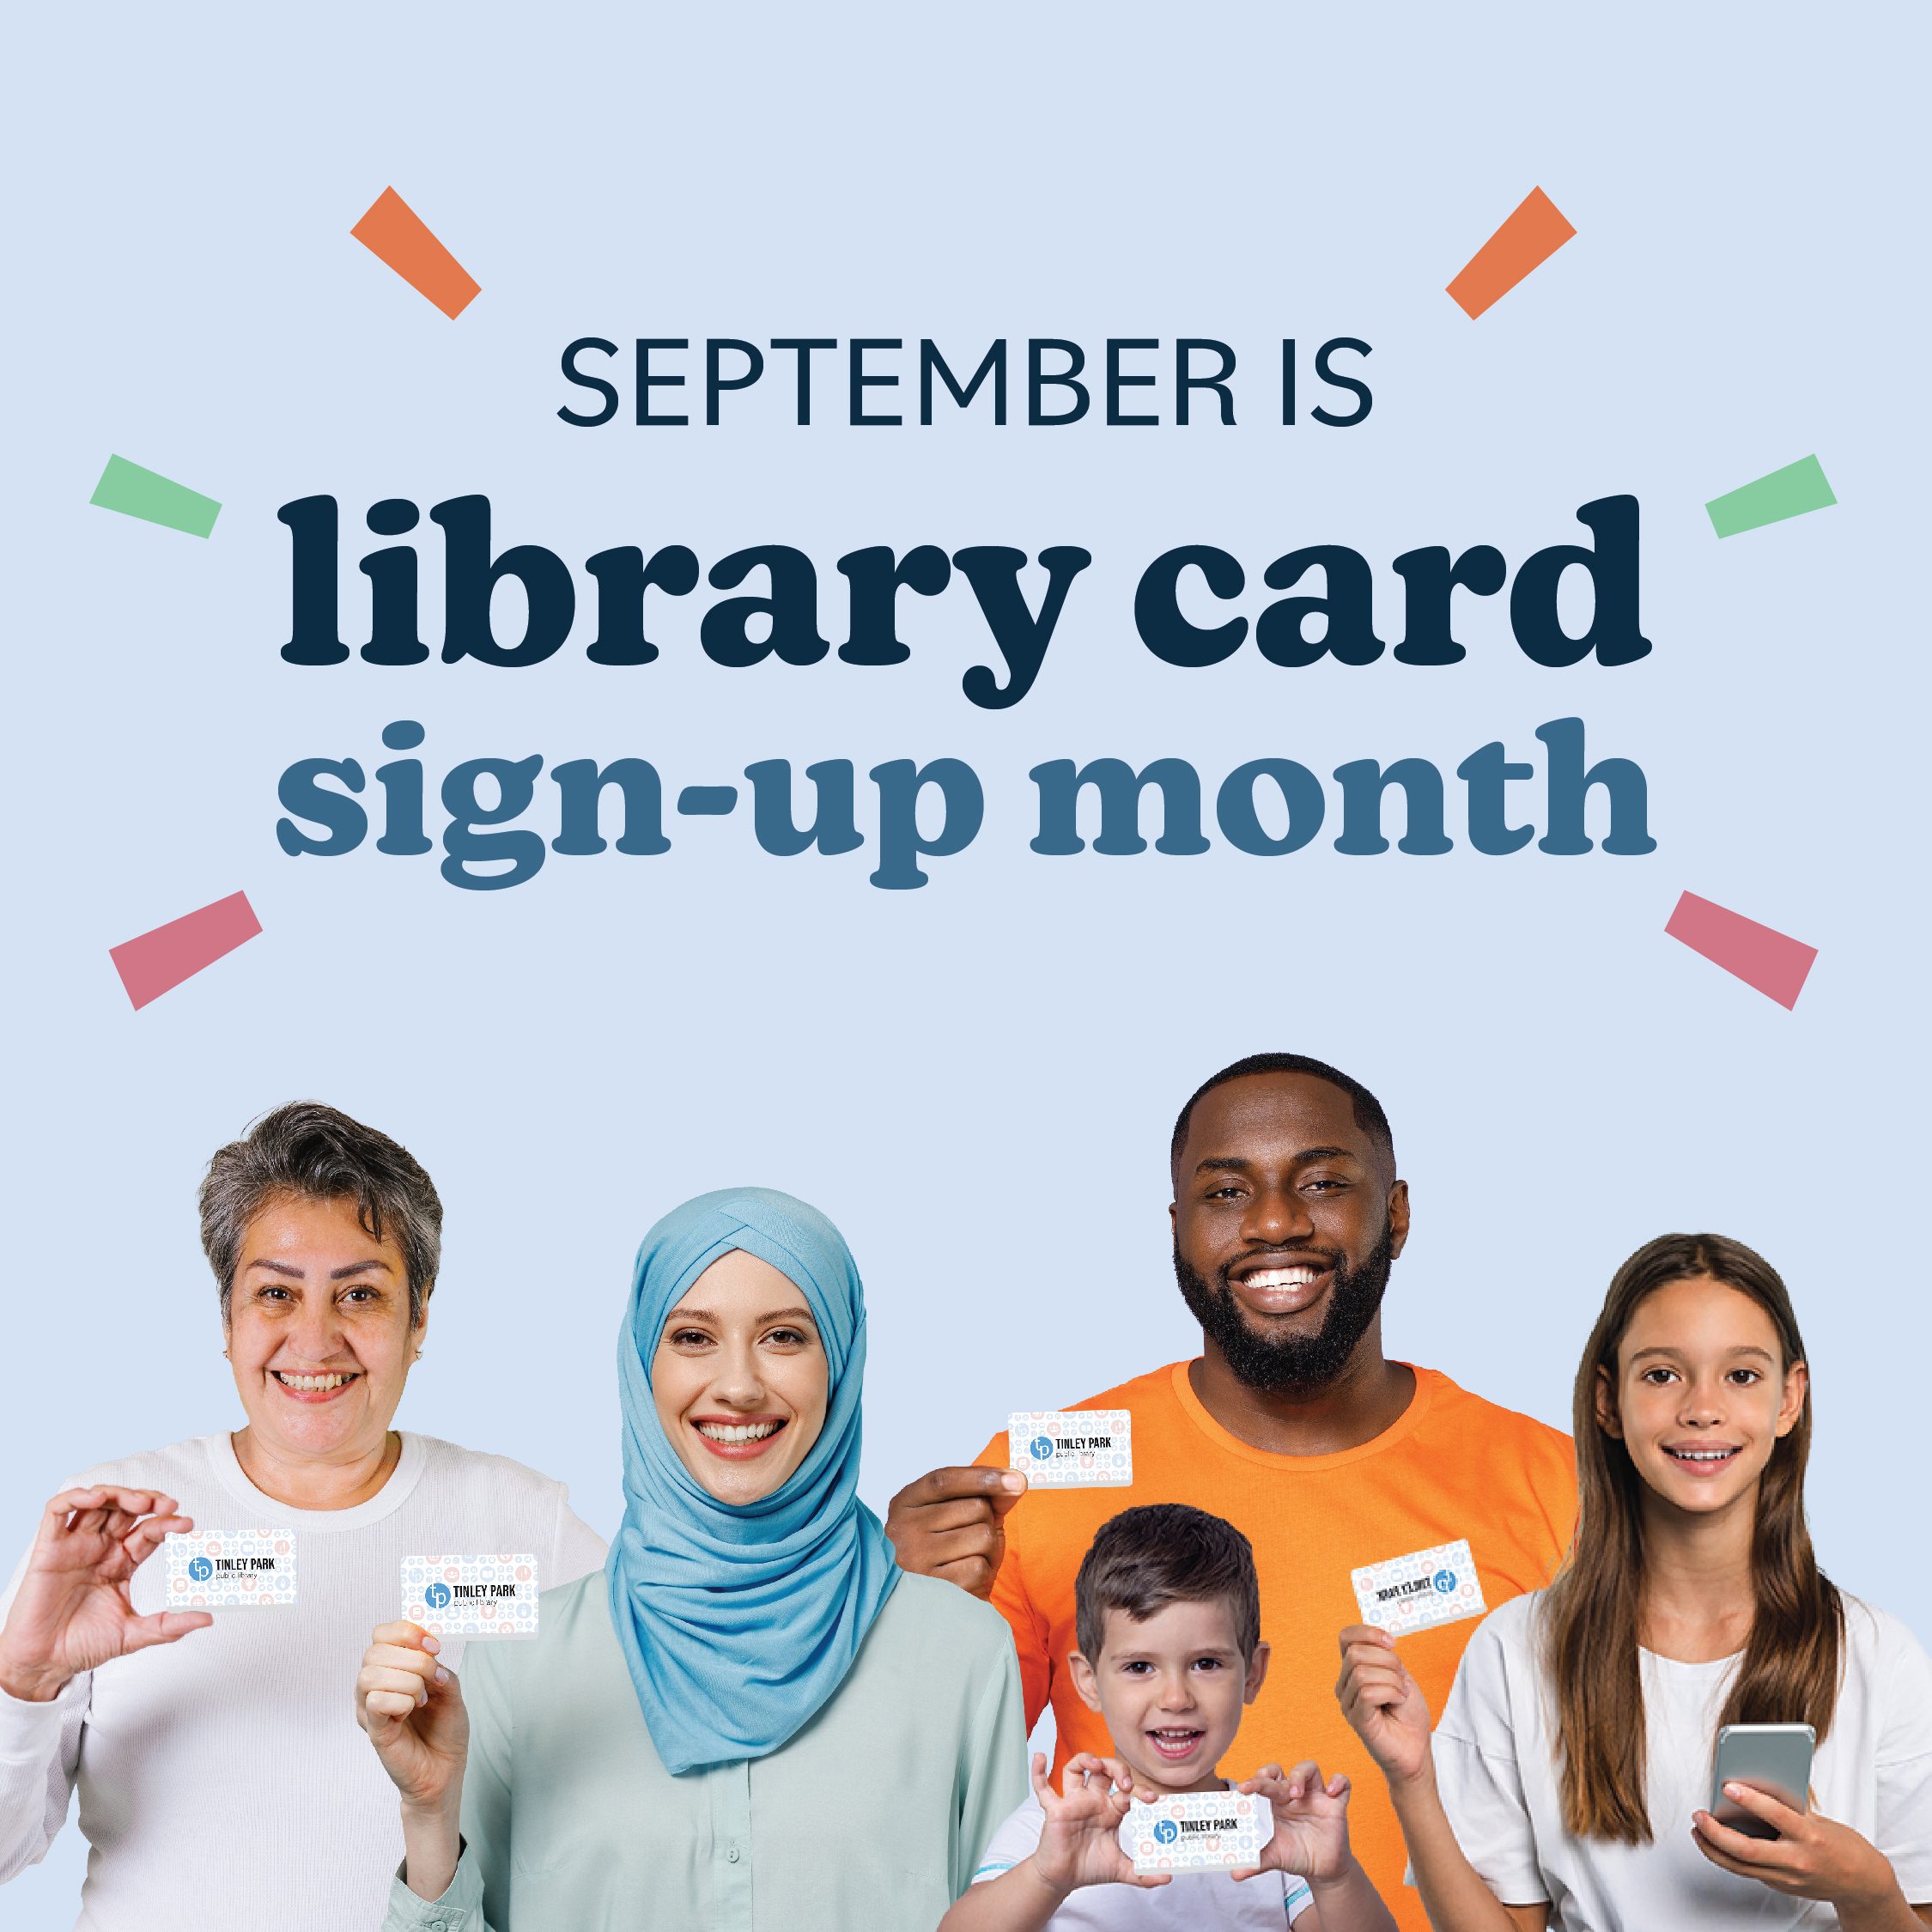 September is Library Card Sign-Up Month; several people of different ages and races are smiling, holding a library card in their hands